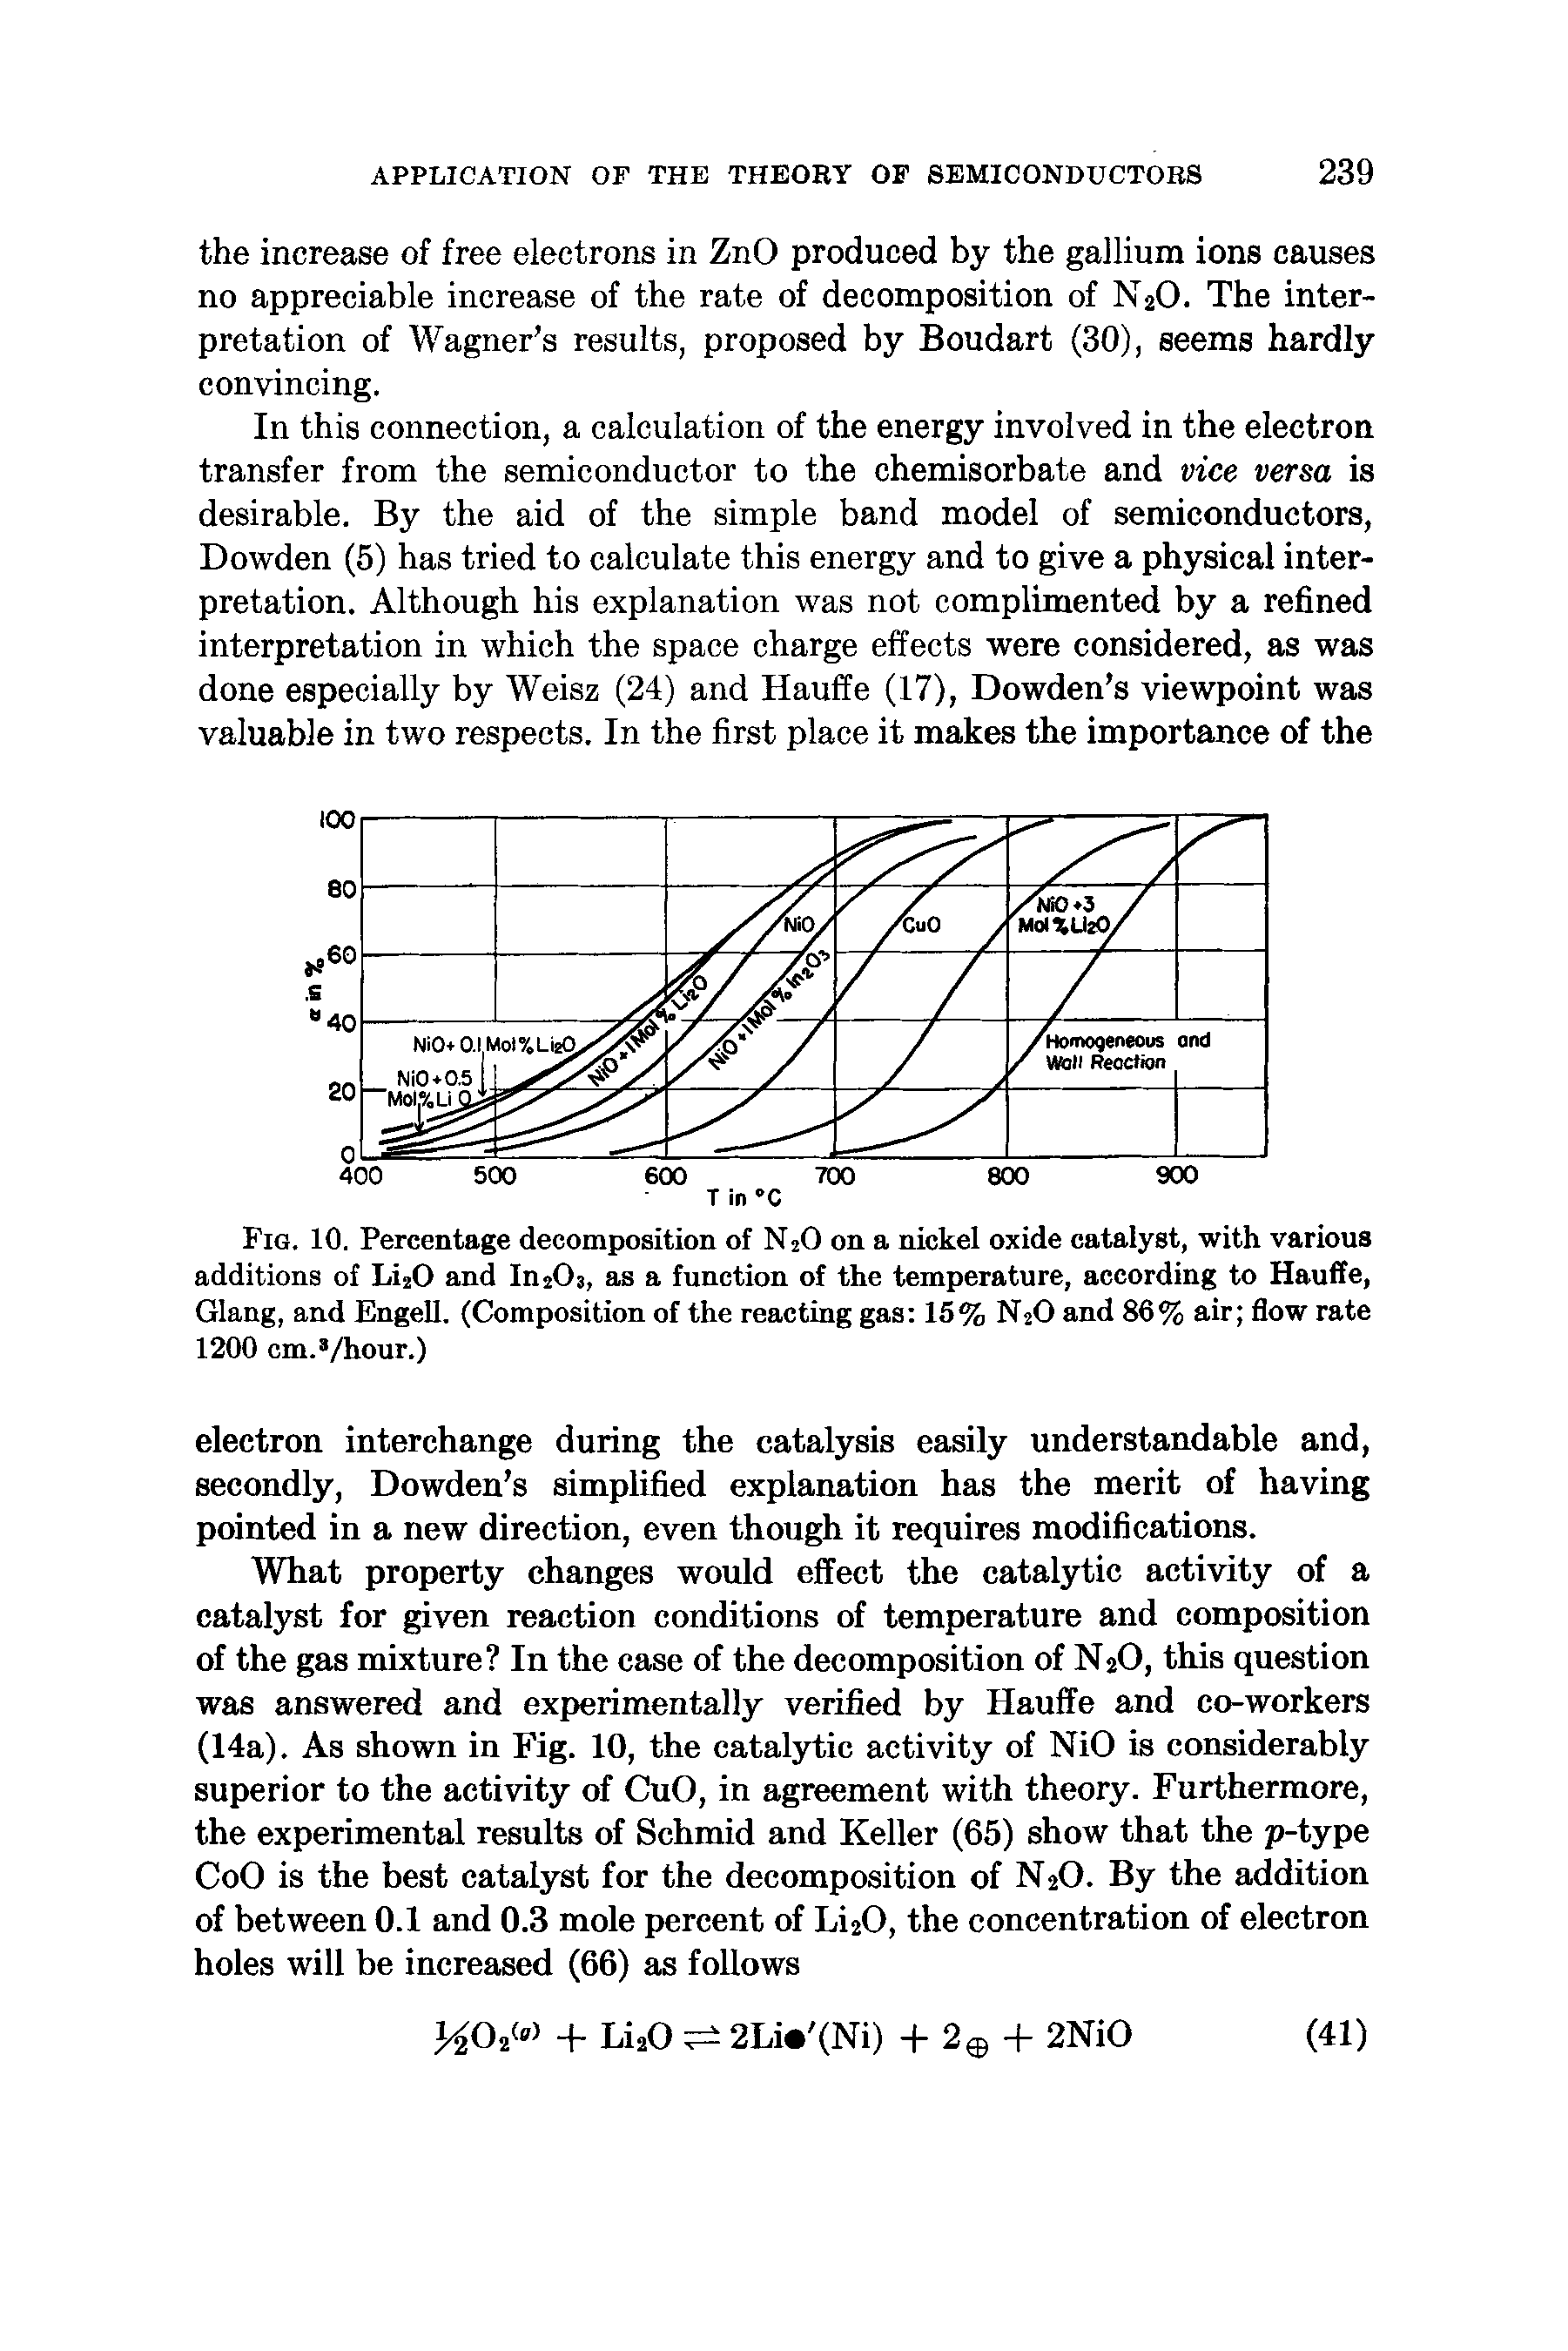 Fig. 10. Percentage decomposition of N2O on a nickel oxide catalyst, with various additions of Li2O and InjOs, as a function of the temperature, according to Hauffe, Glang, and EngeU. (Composition of the reacting gas 15% N2O and 86% air flow rate 1200 cm. /hour.)...